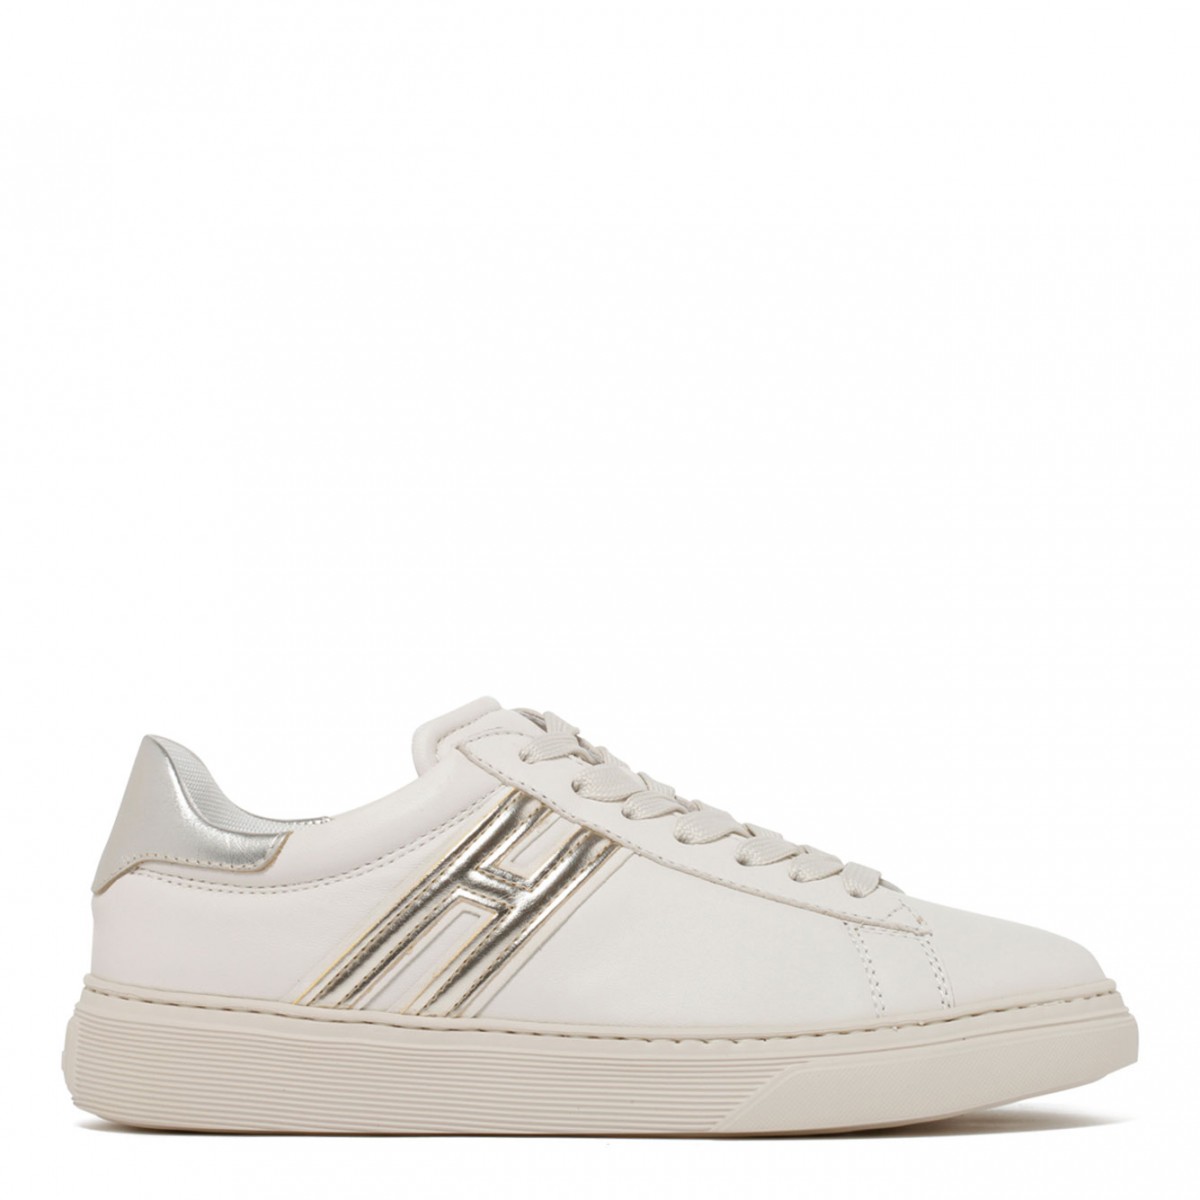 White Calf Leather H365 Low Top Sneakers